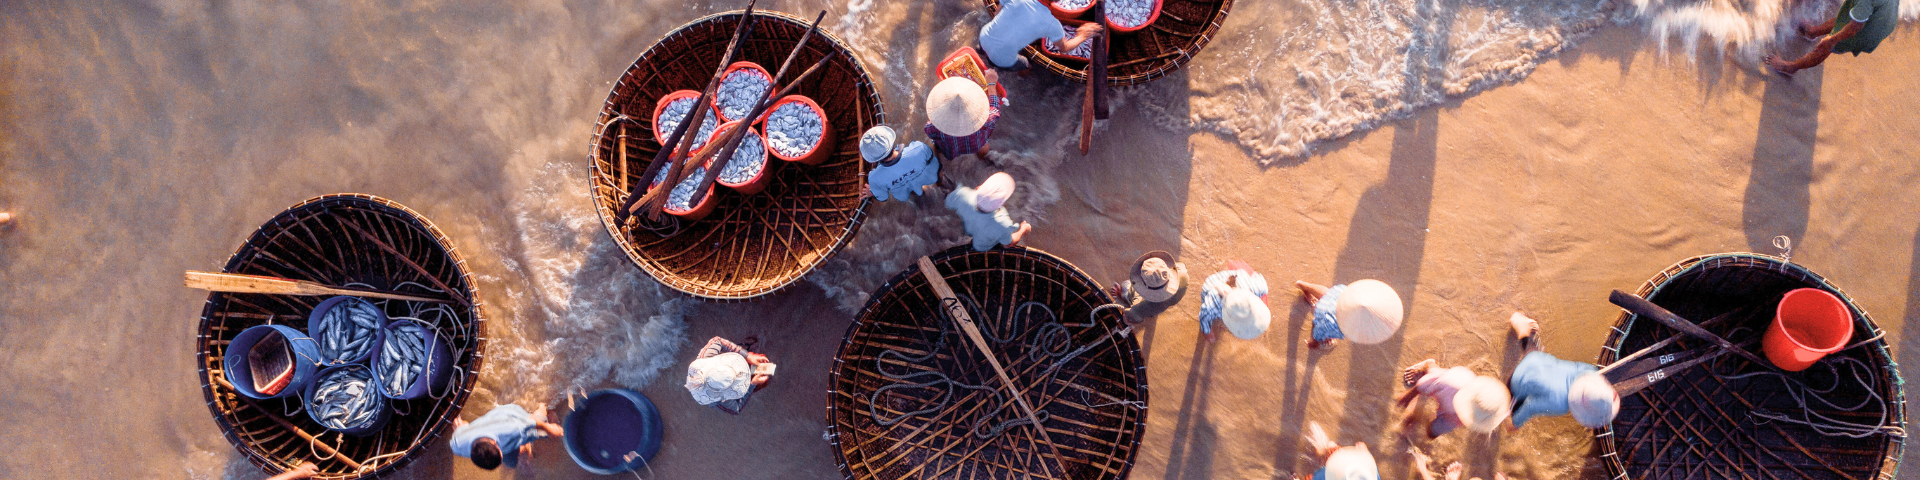 Aerial view of large baskets filled with smaller baskets of fish, by the coast